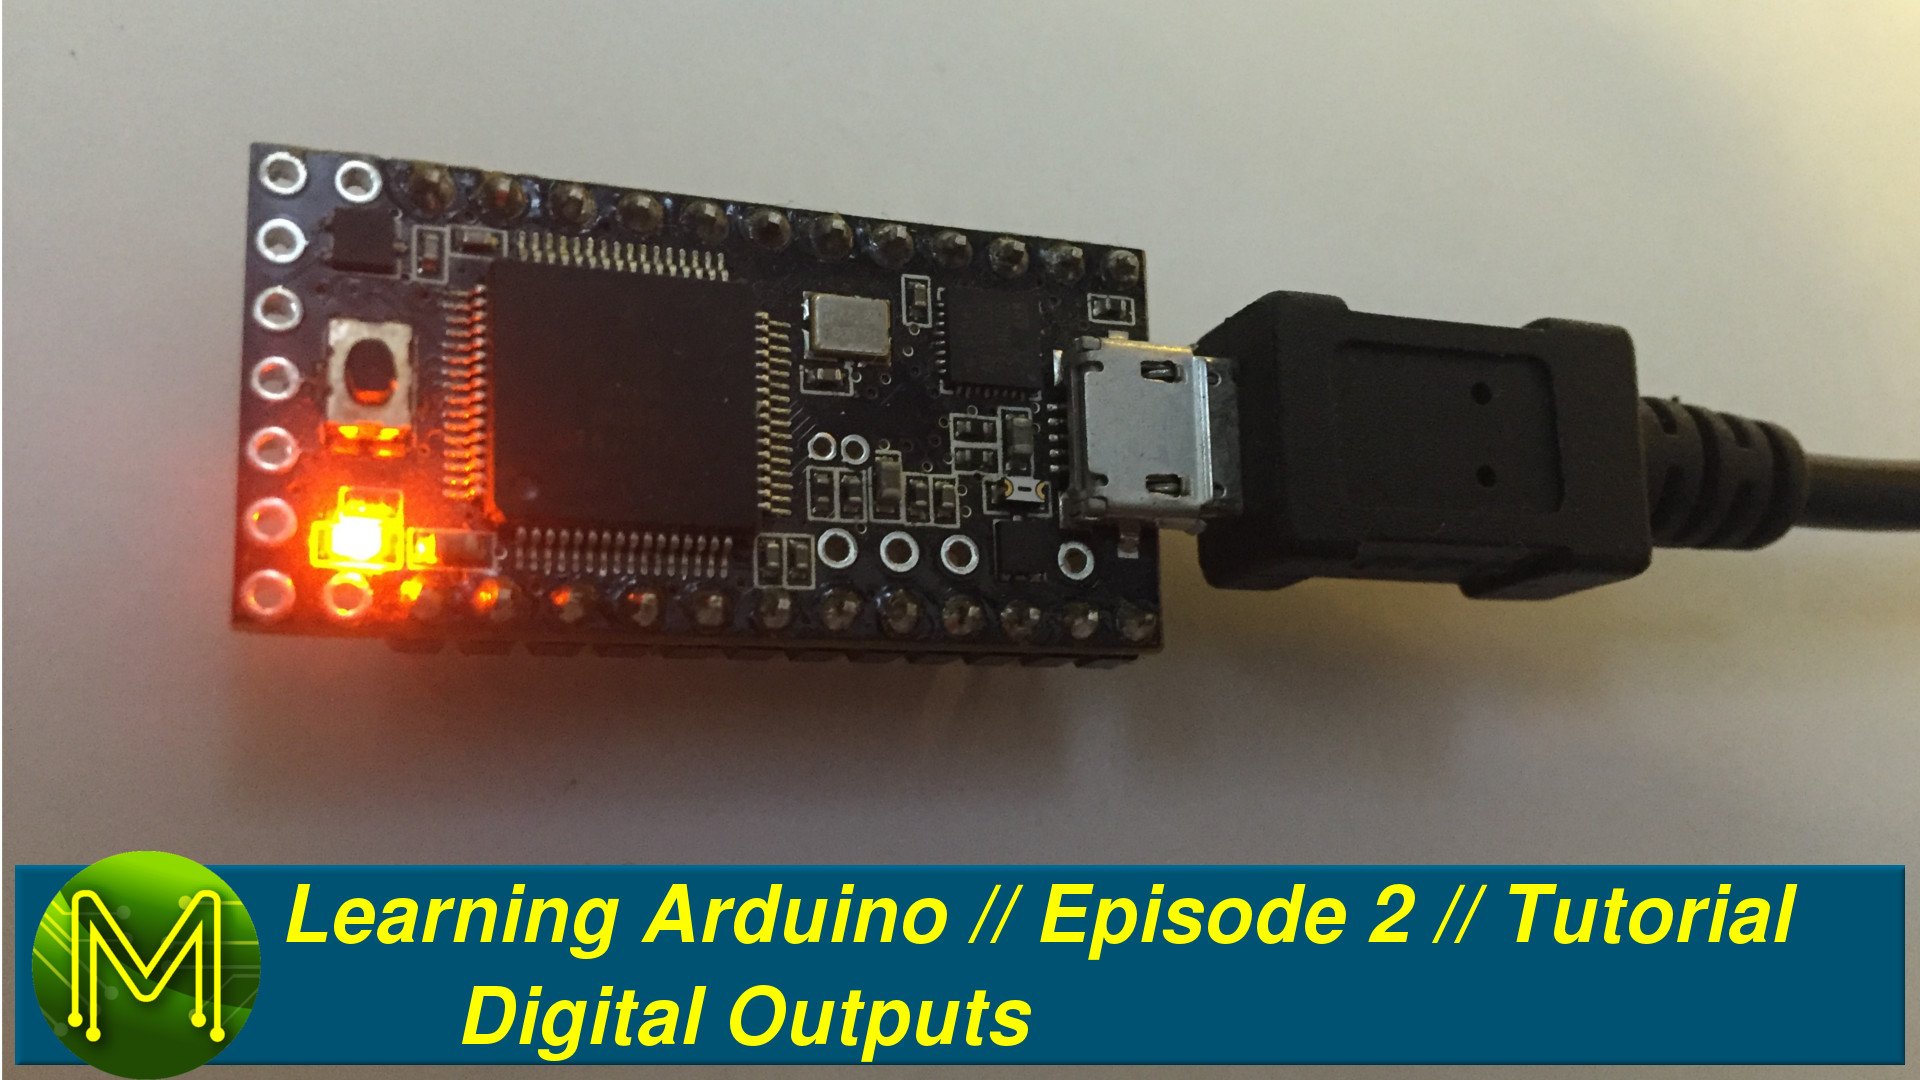 Learning Arduino: Digital Outputs // Episode 2 // Tutorial